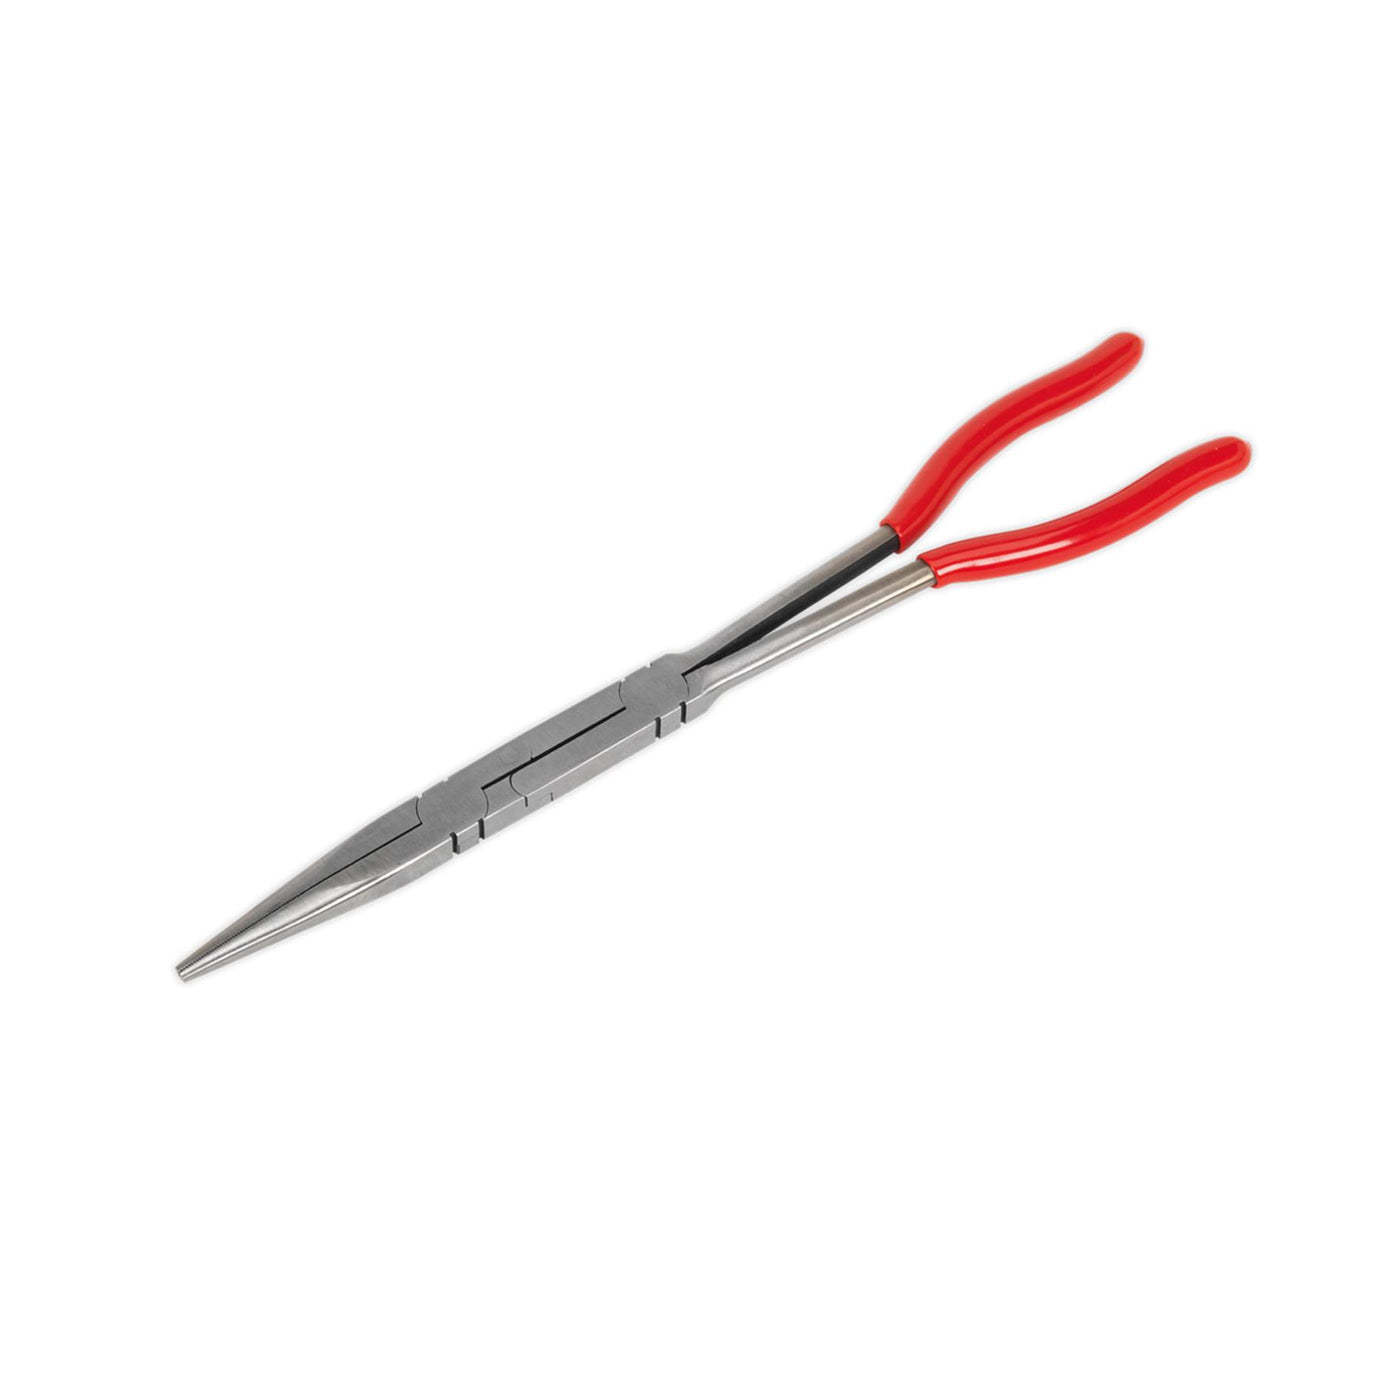 Sealey Needle Nose Pliers Double Joint Long Reach 335mm